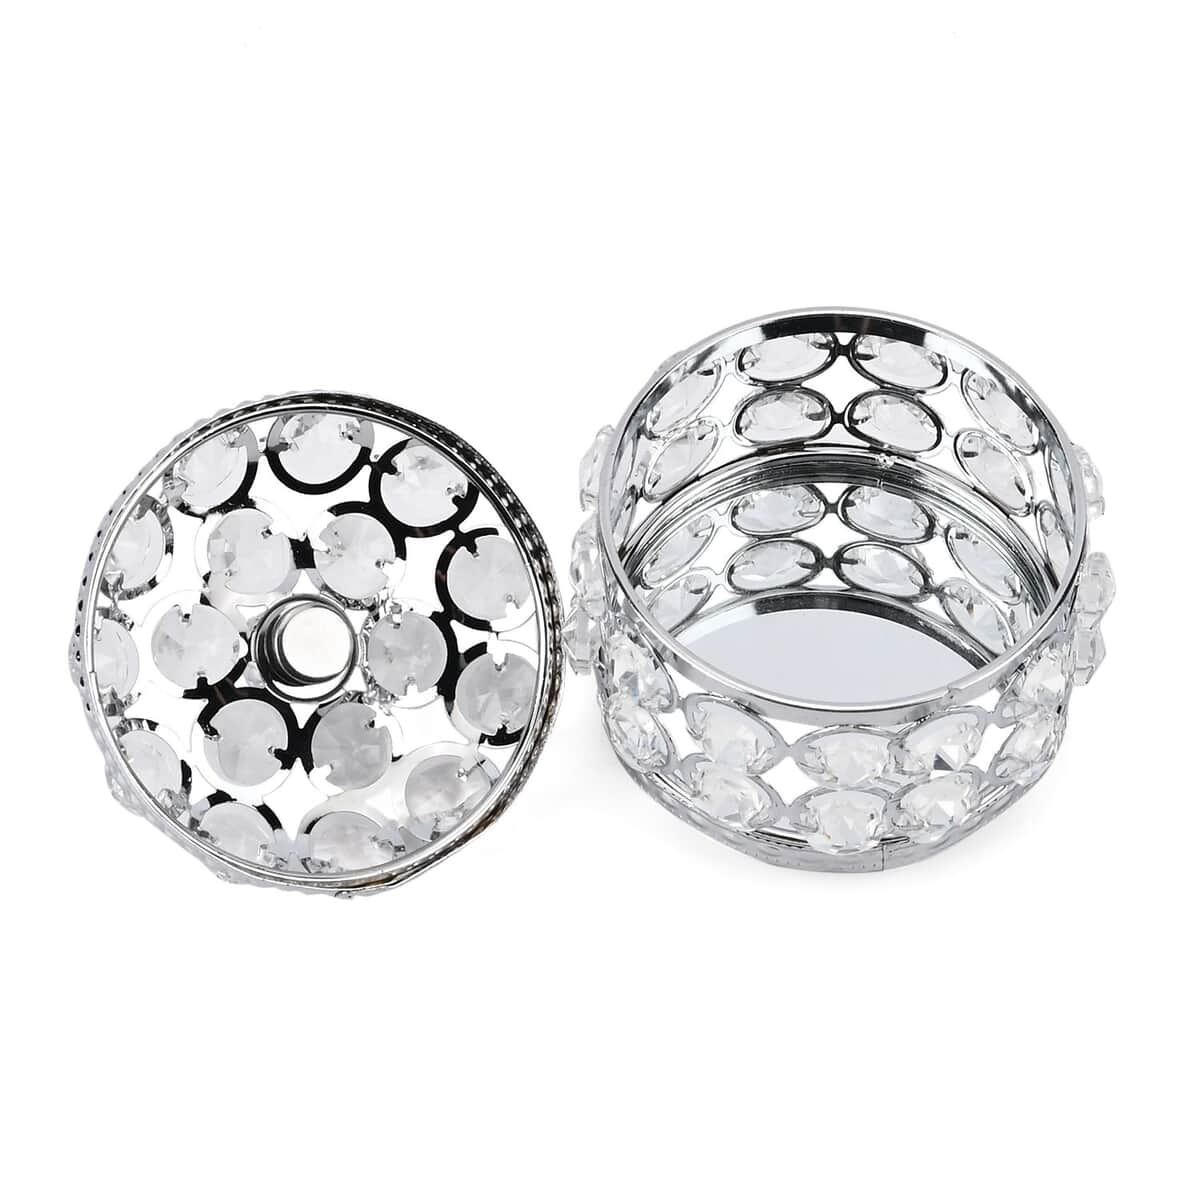 Silver Color Round Design Crystal Jewelry BoxCrystal Jewelry Box, Trinket Organizer Treasure Box For Rings Earrings Necklace, Jewelry Storage Box (3.9x3.9x3.5) image number 4